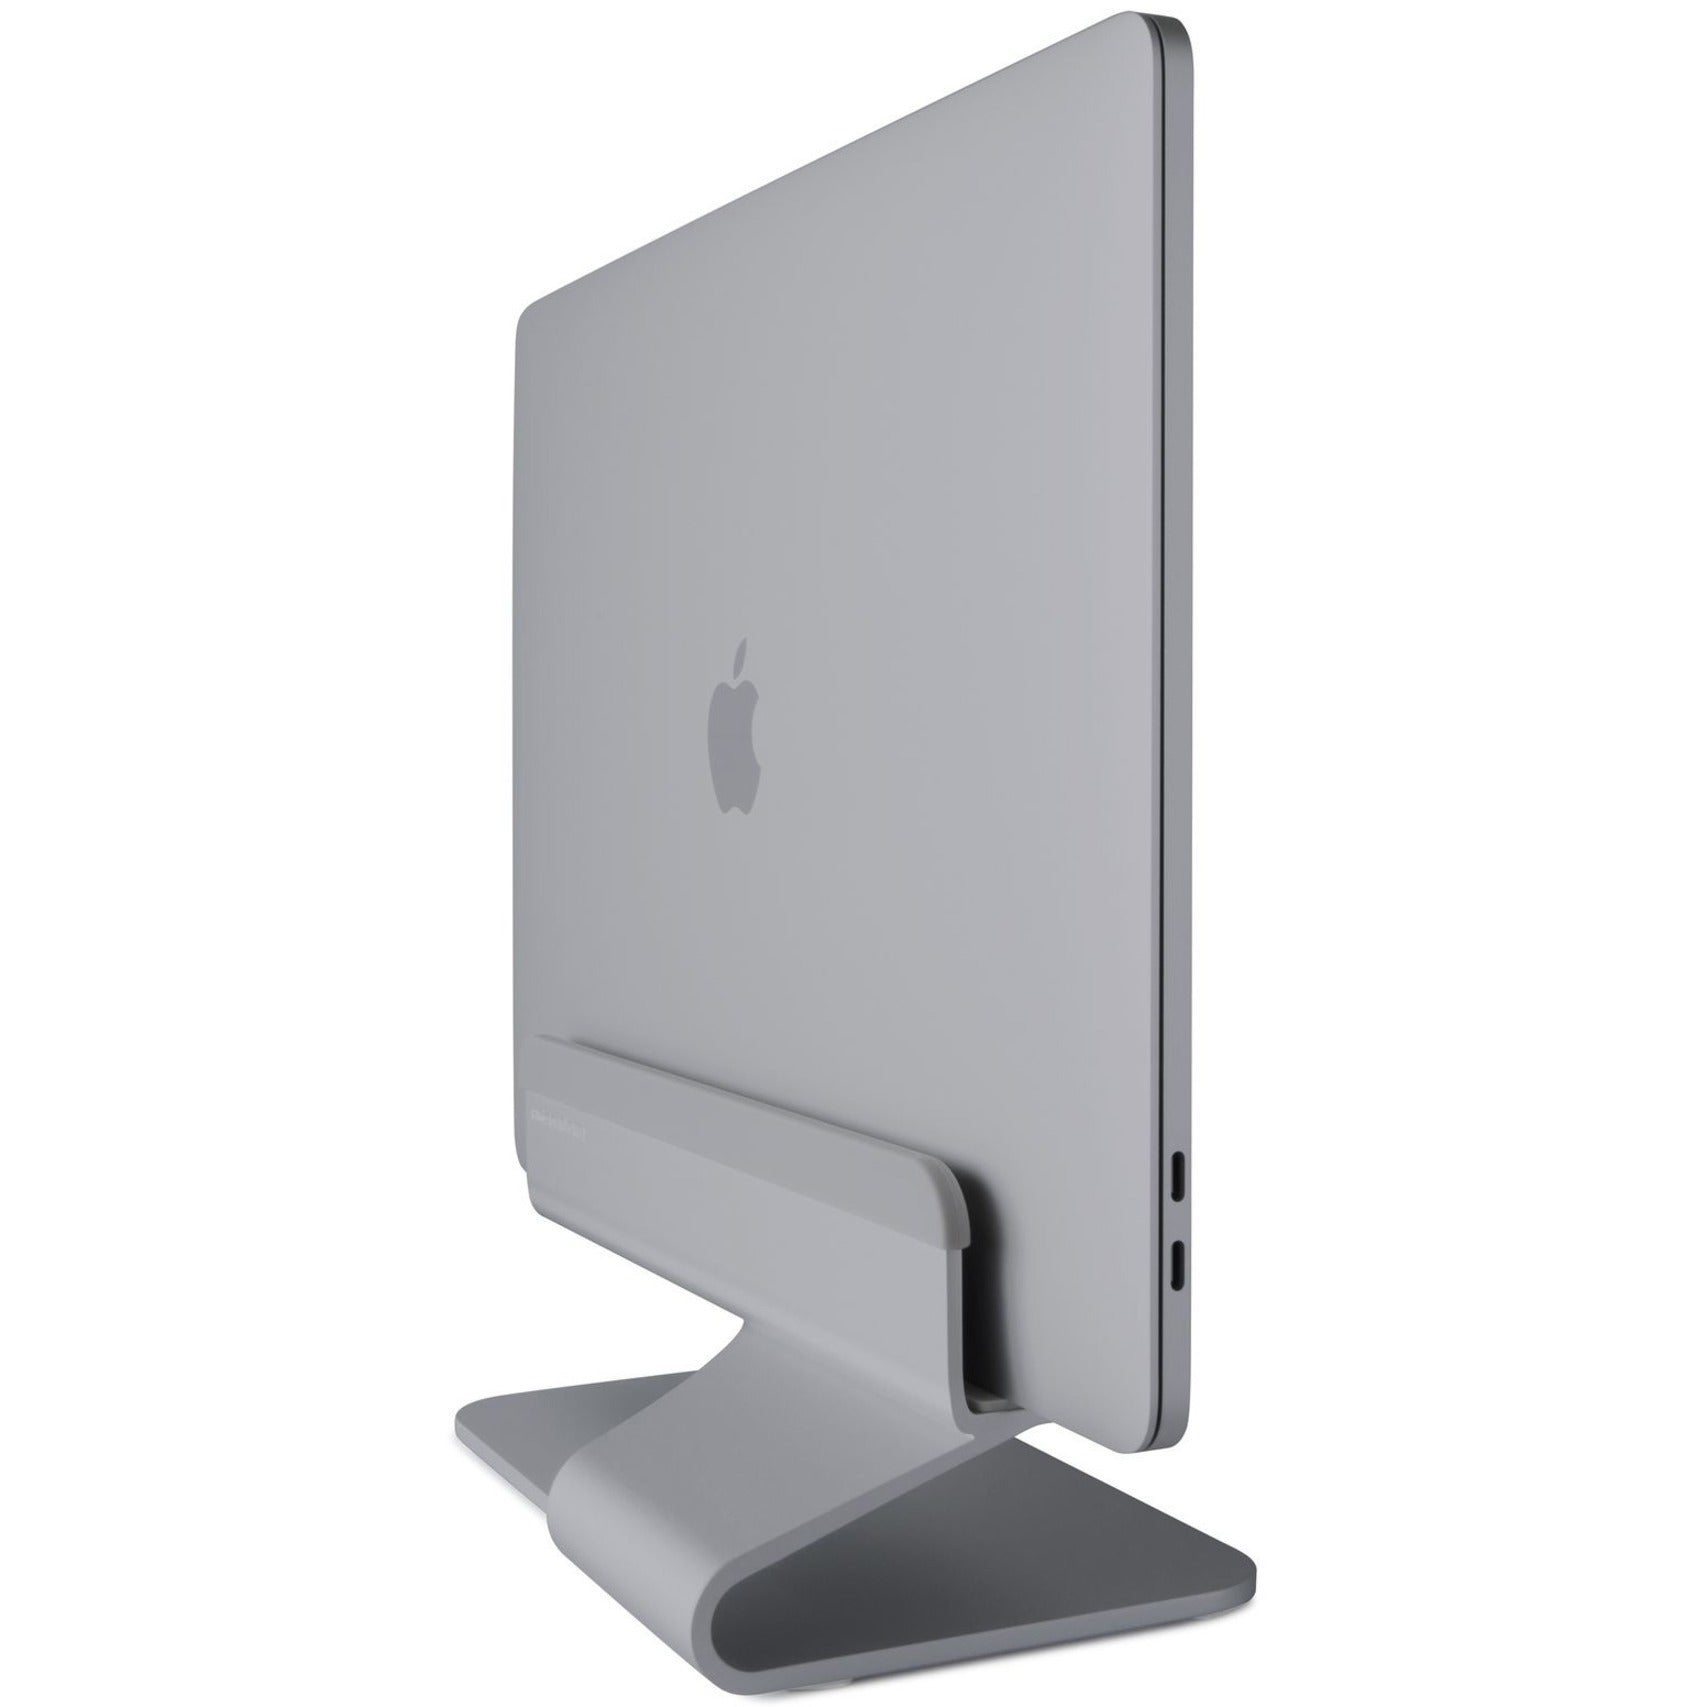 Rain Design 10038 mTower Vertical Laptop Stand - Space Gray, TAA Compliant, 1 Year Warranty